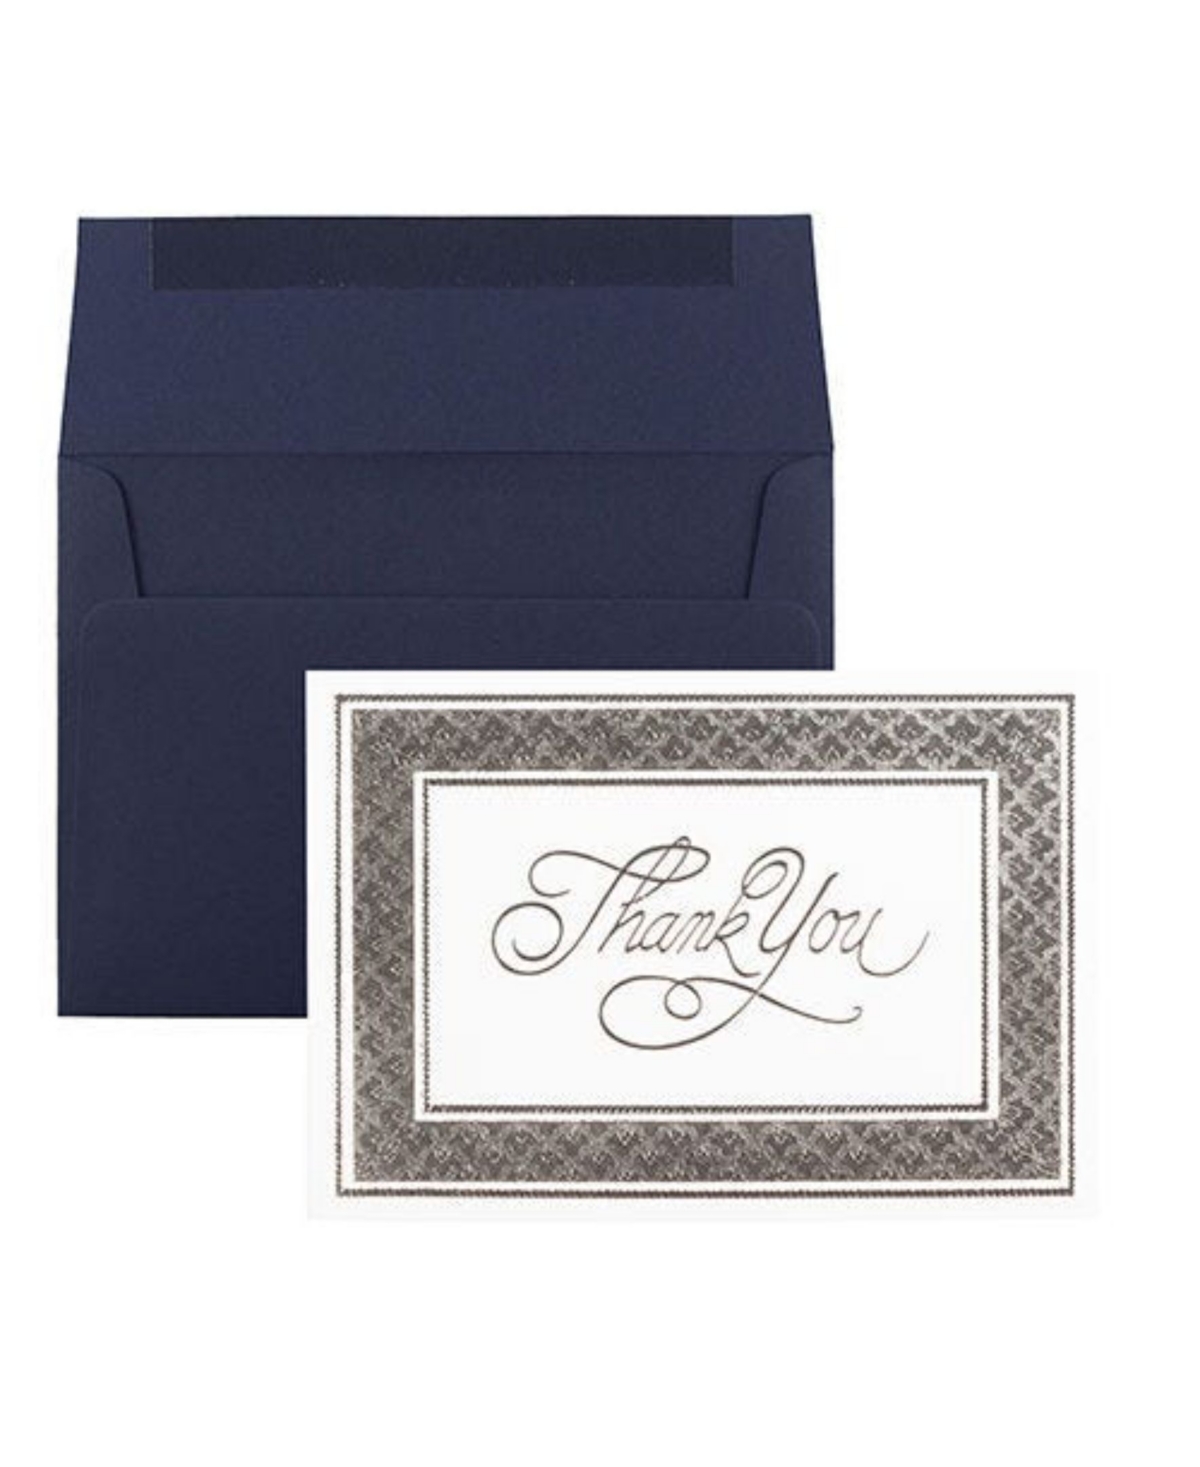 Jam Paper Thank You Card Sets- 25 Cards And Envelopes In Silver Border Cards With Navy Envelopes